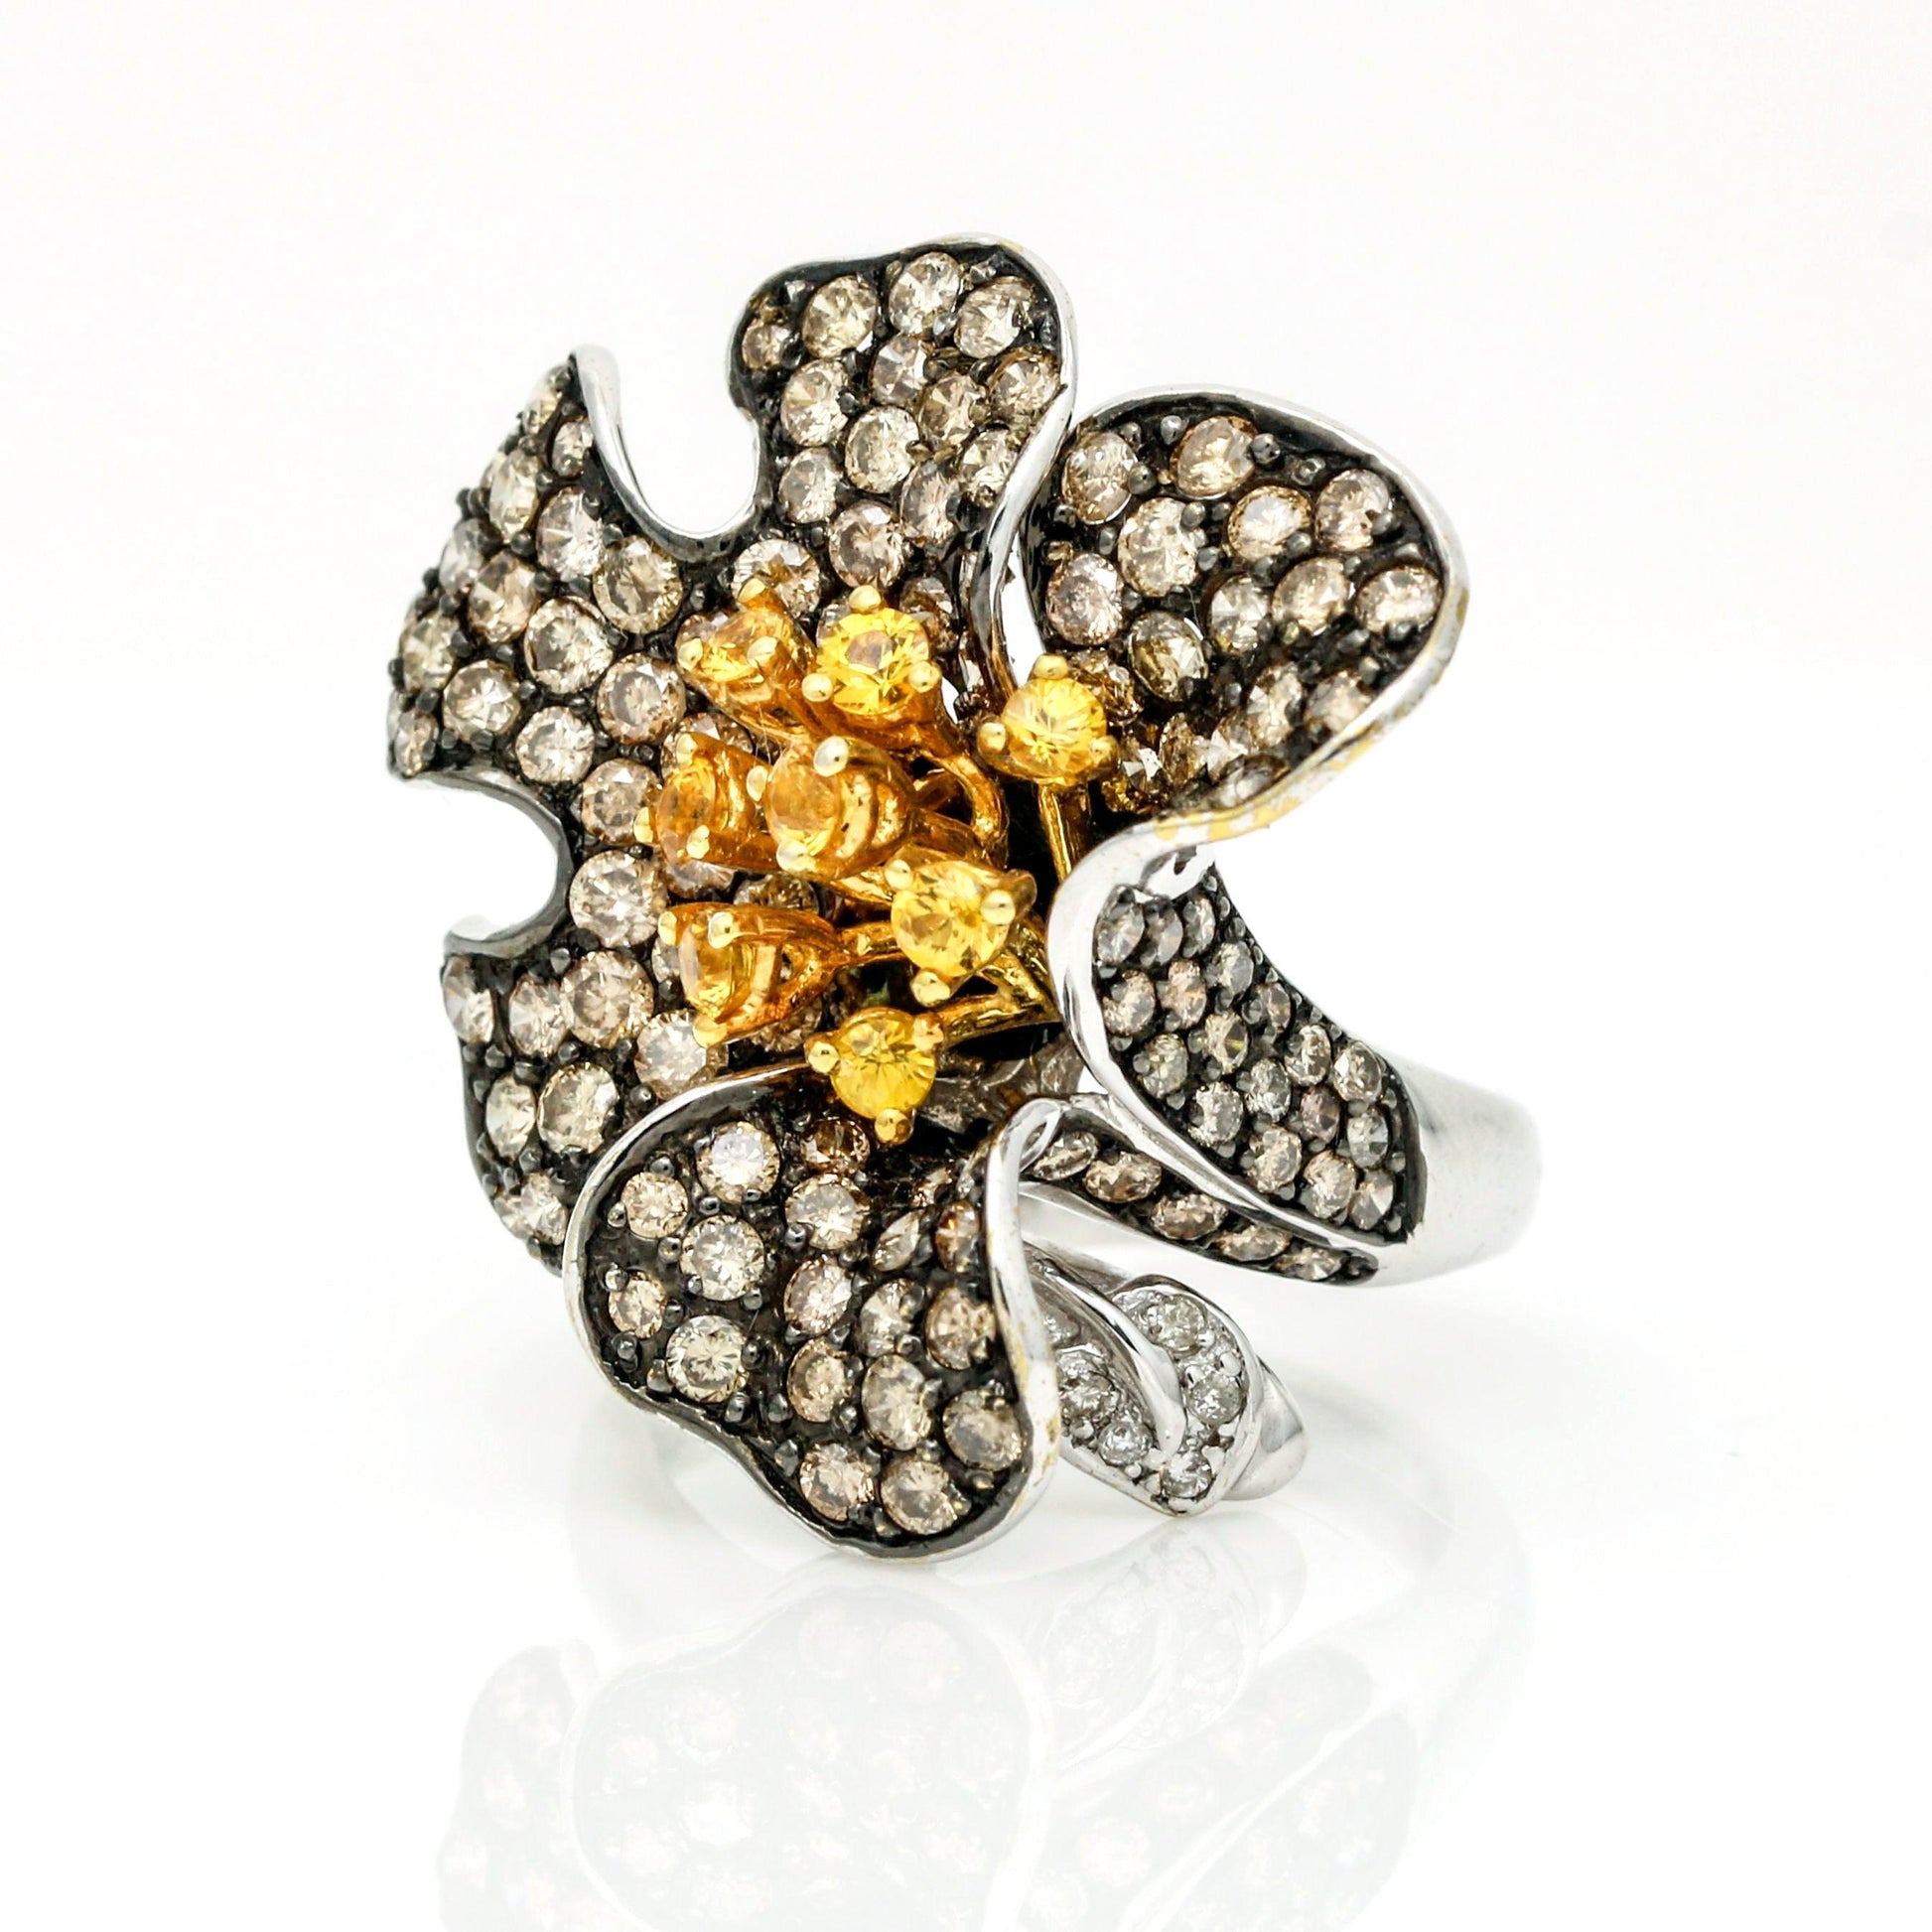 Pave Brown Diamonds & Yellow Sapphire Flower Statement Ring in 14k White Gold - 31 Jewels Inc.